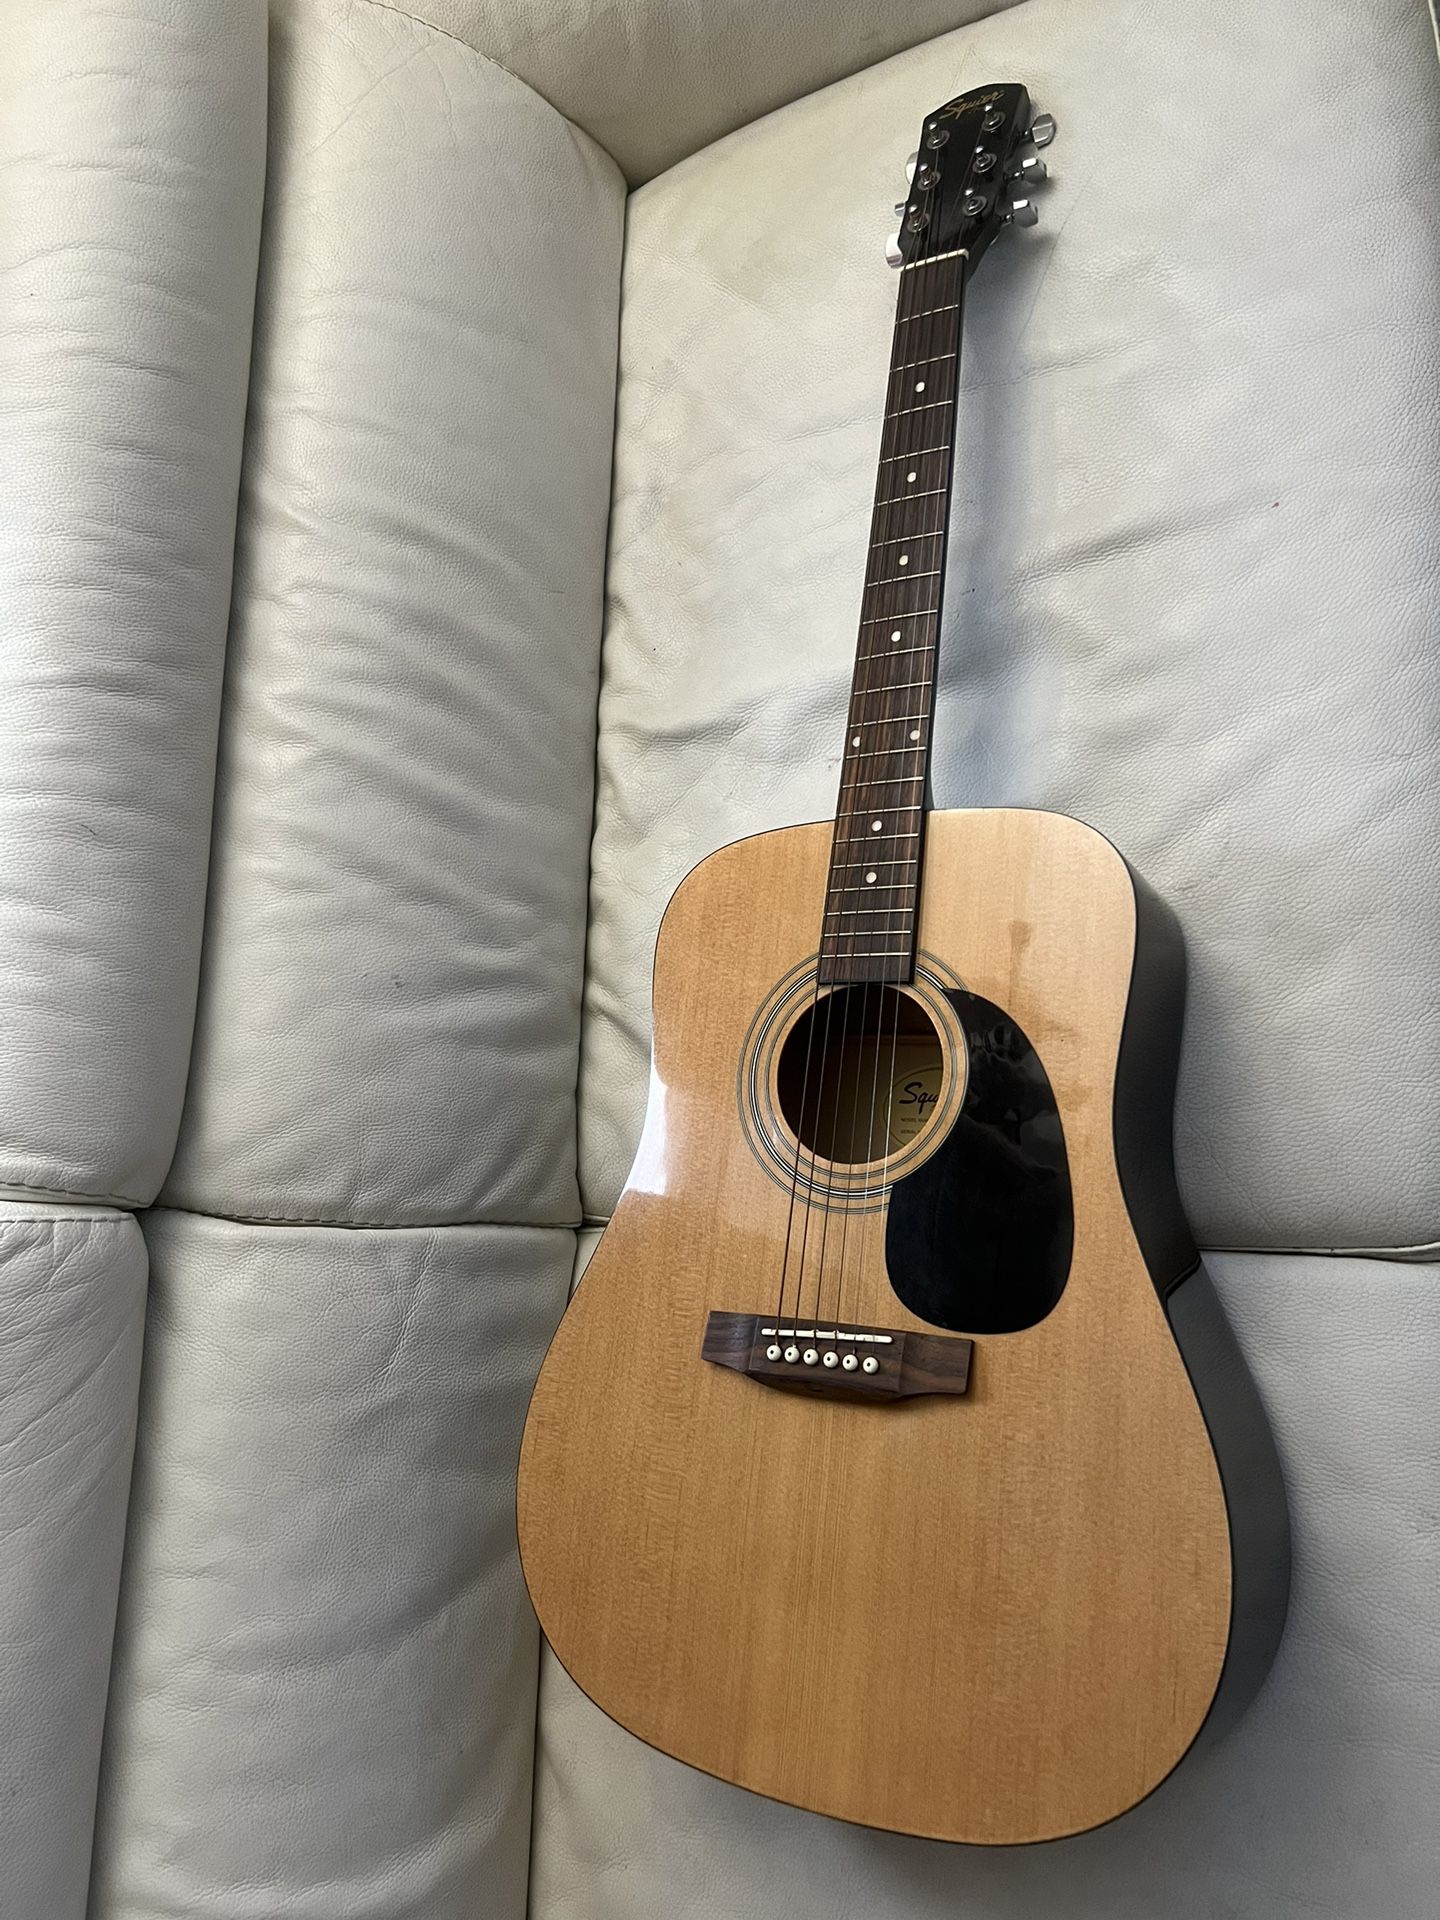 Squier by Fender Acoustic Guitar with bag